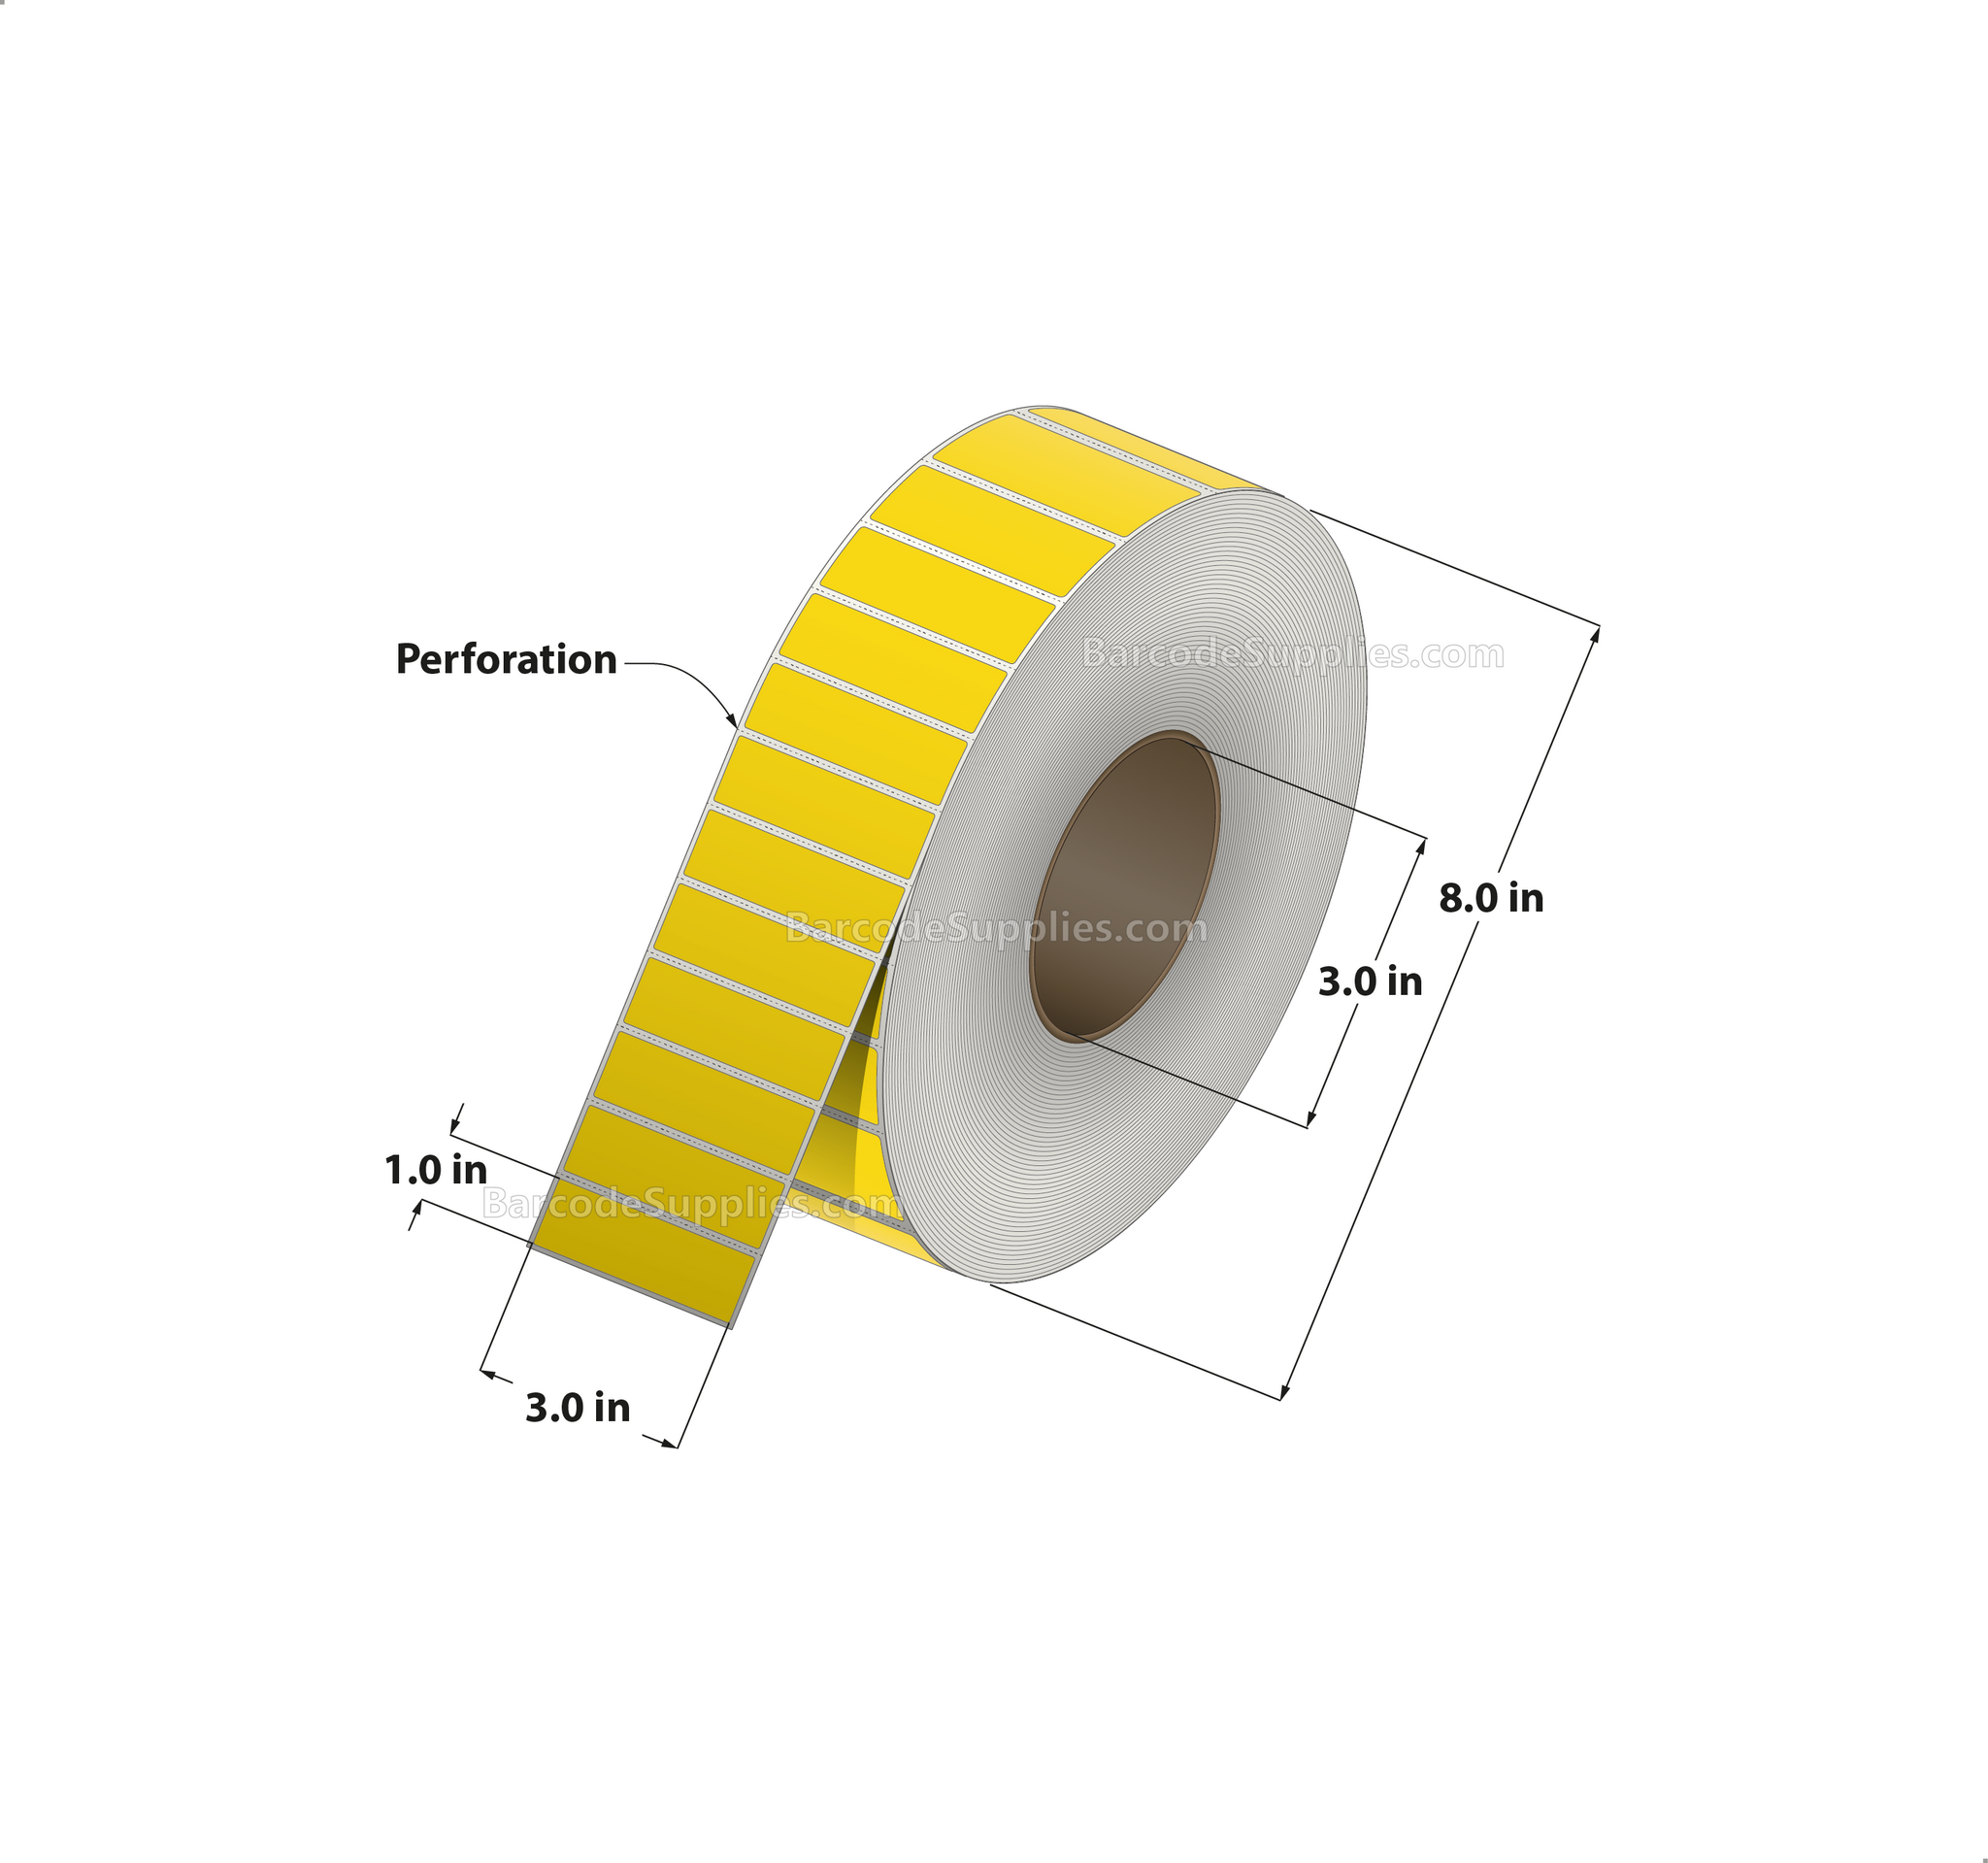 3 x 1 Thermal Transfer Pantone Yellow Labels With Permanent Adhesive - Perforated - 5500 Labels Per Roll - Carton Of 8 Rolls - 44000 Labels Total - MPN: RFC-3-1-5500-YL